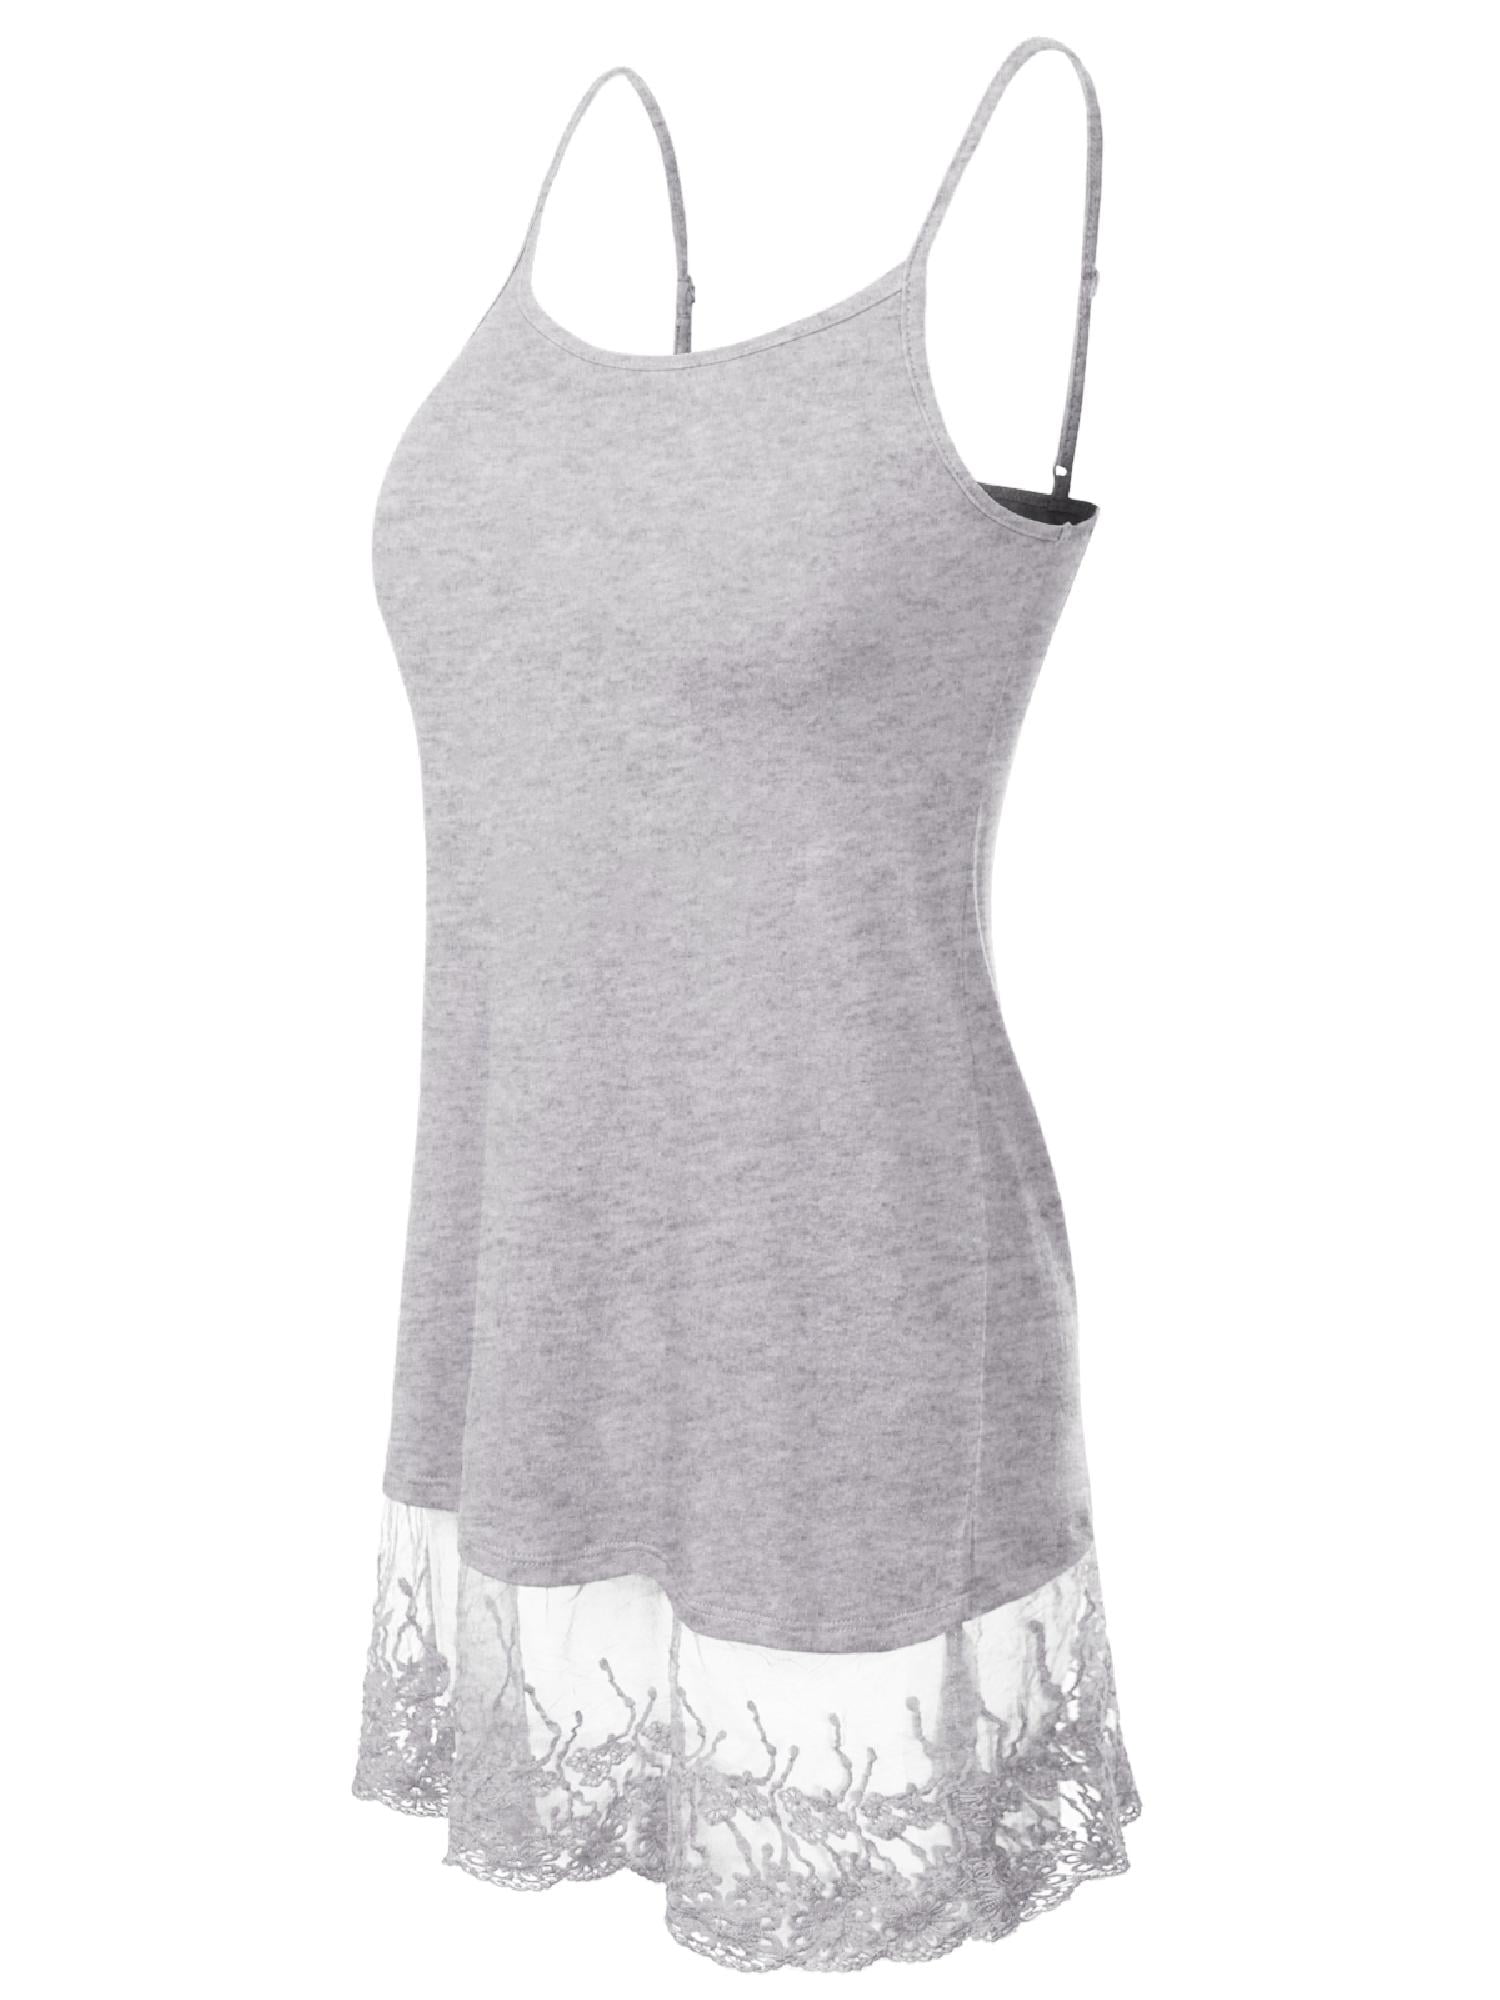 MixMatchy Women's Long Line Cami with Lace Extender Camisole Tank Top ...